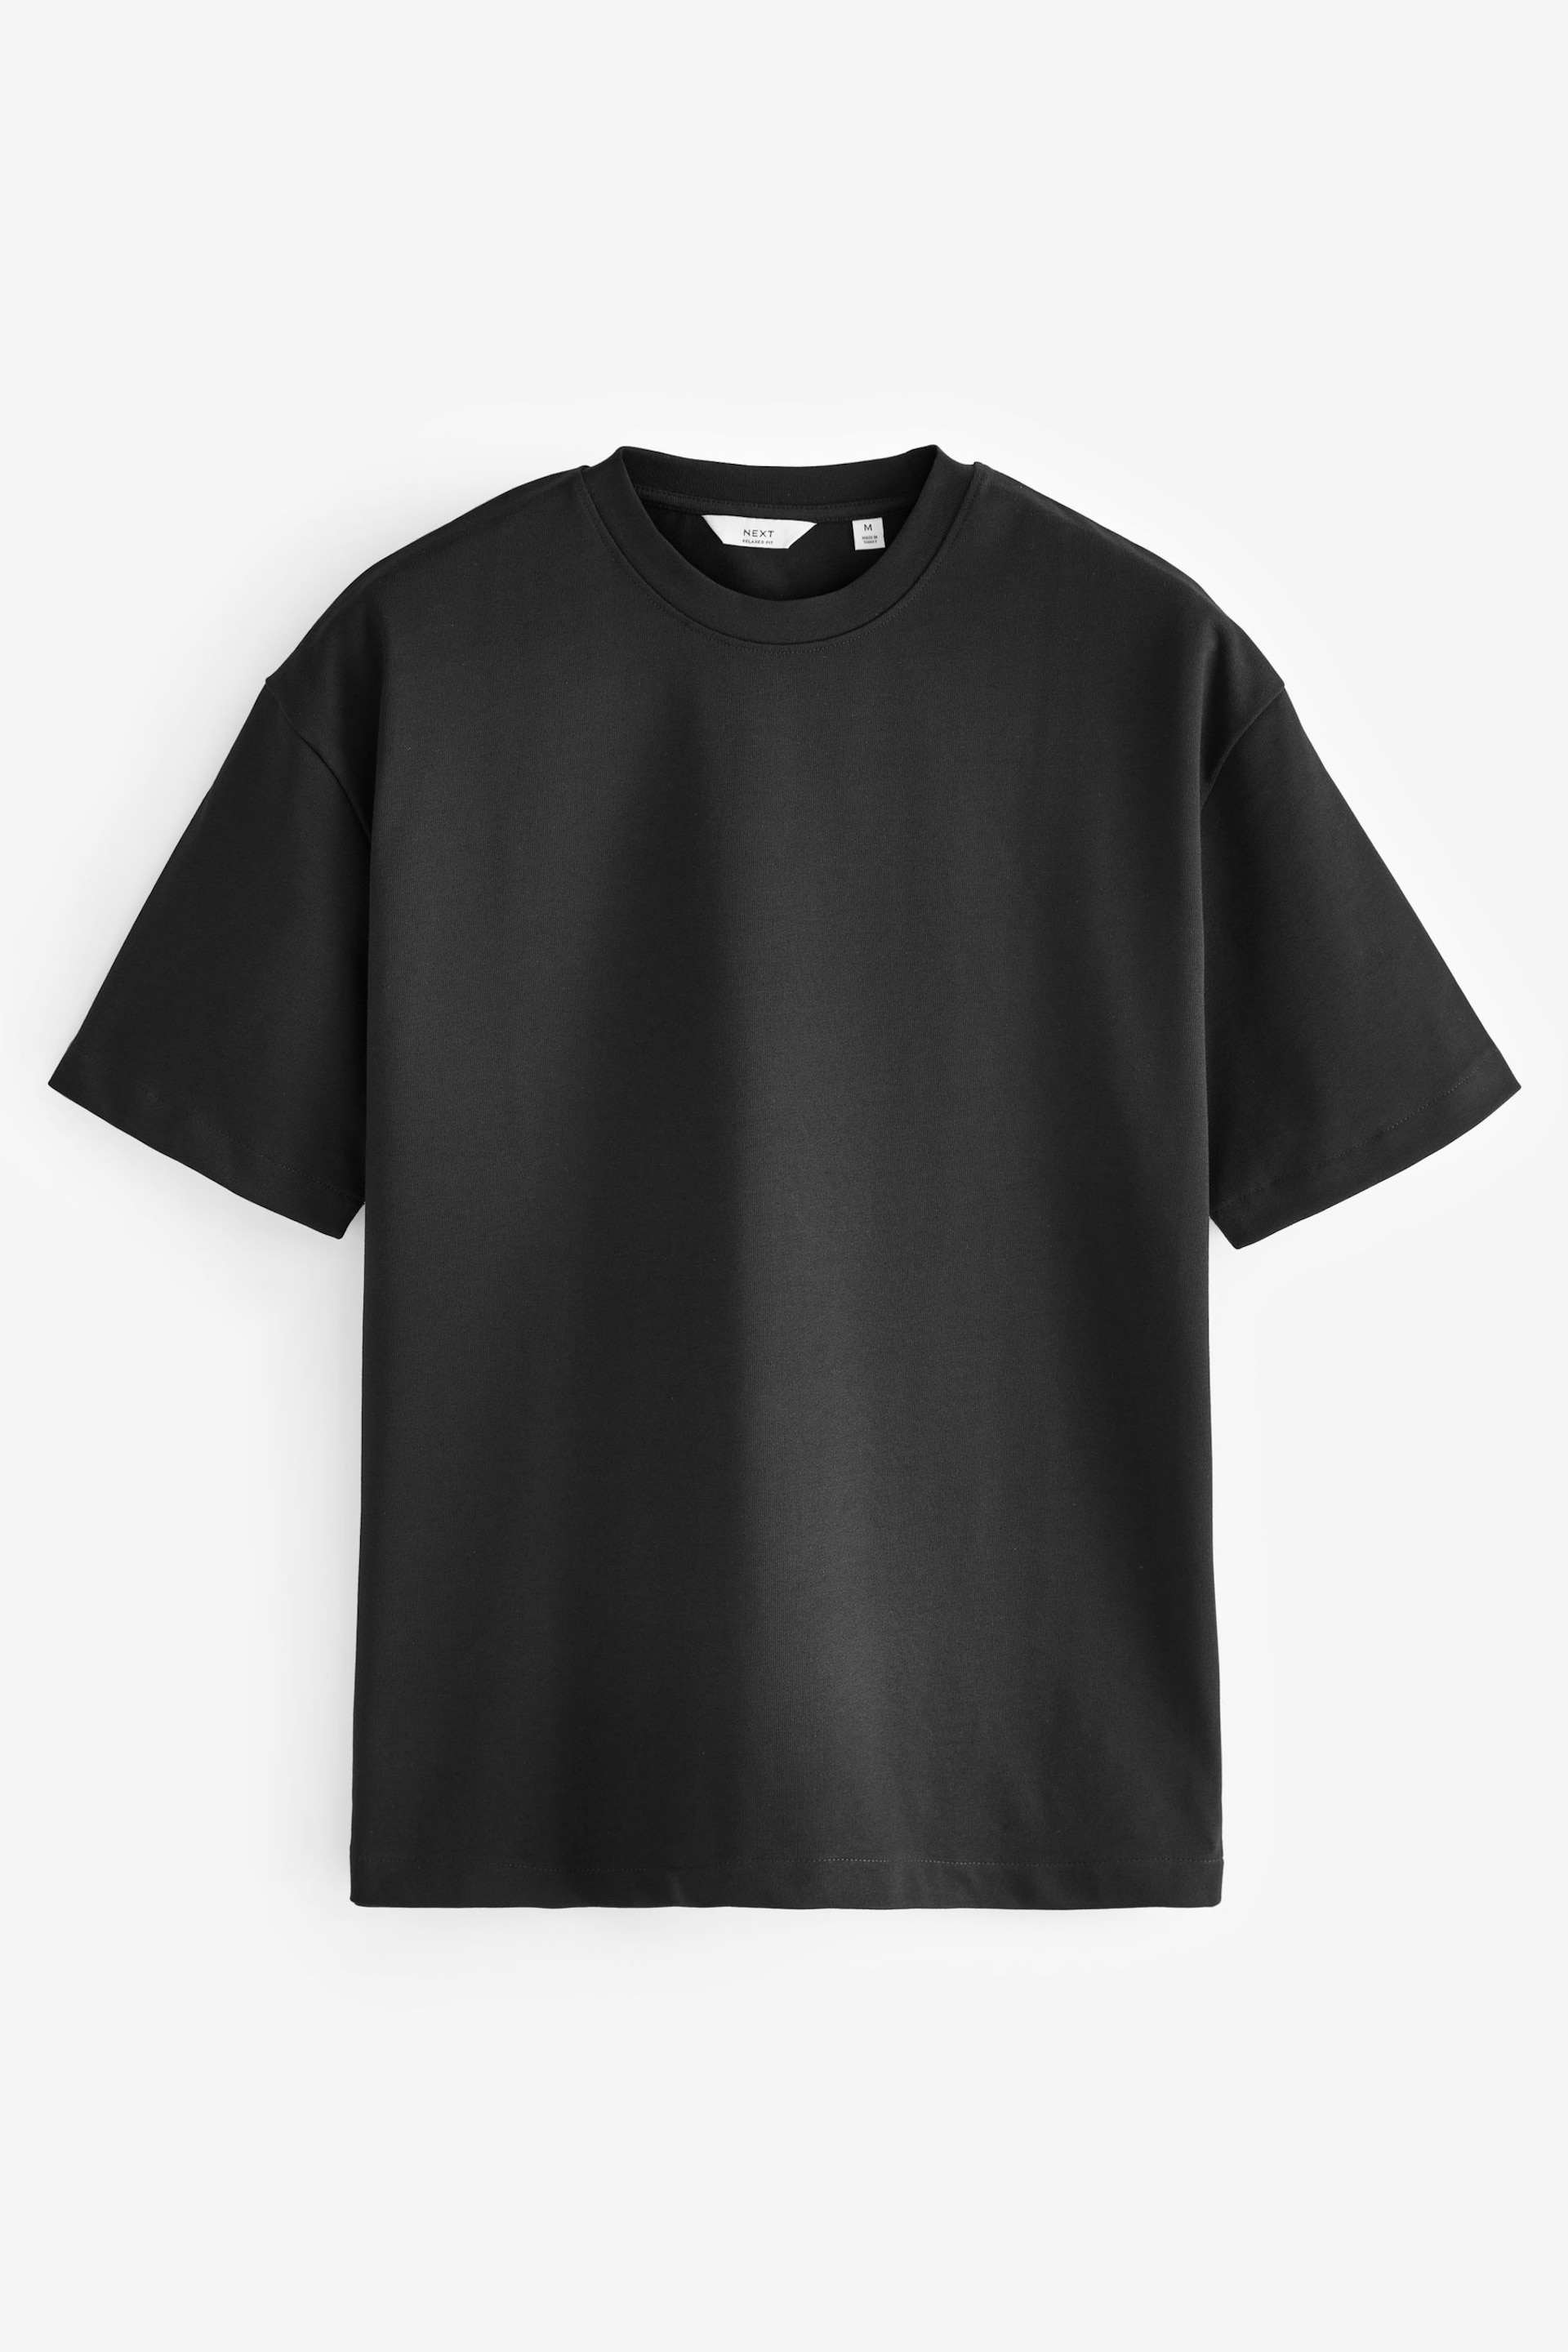 Black Relaxed Fit Heavy weight T-Shirts 3 Pack - Image 6 of 10